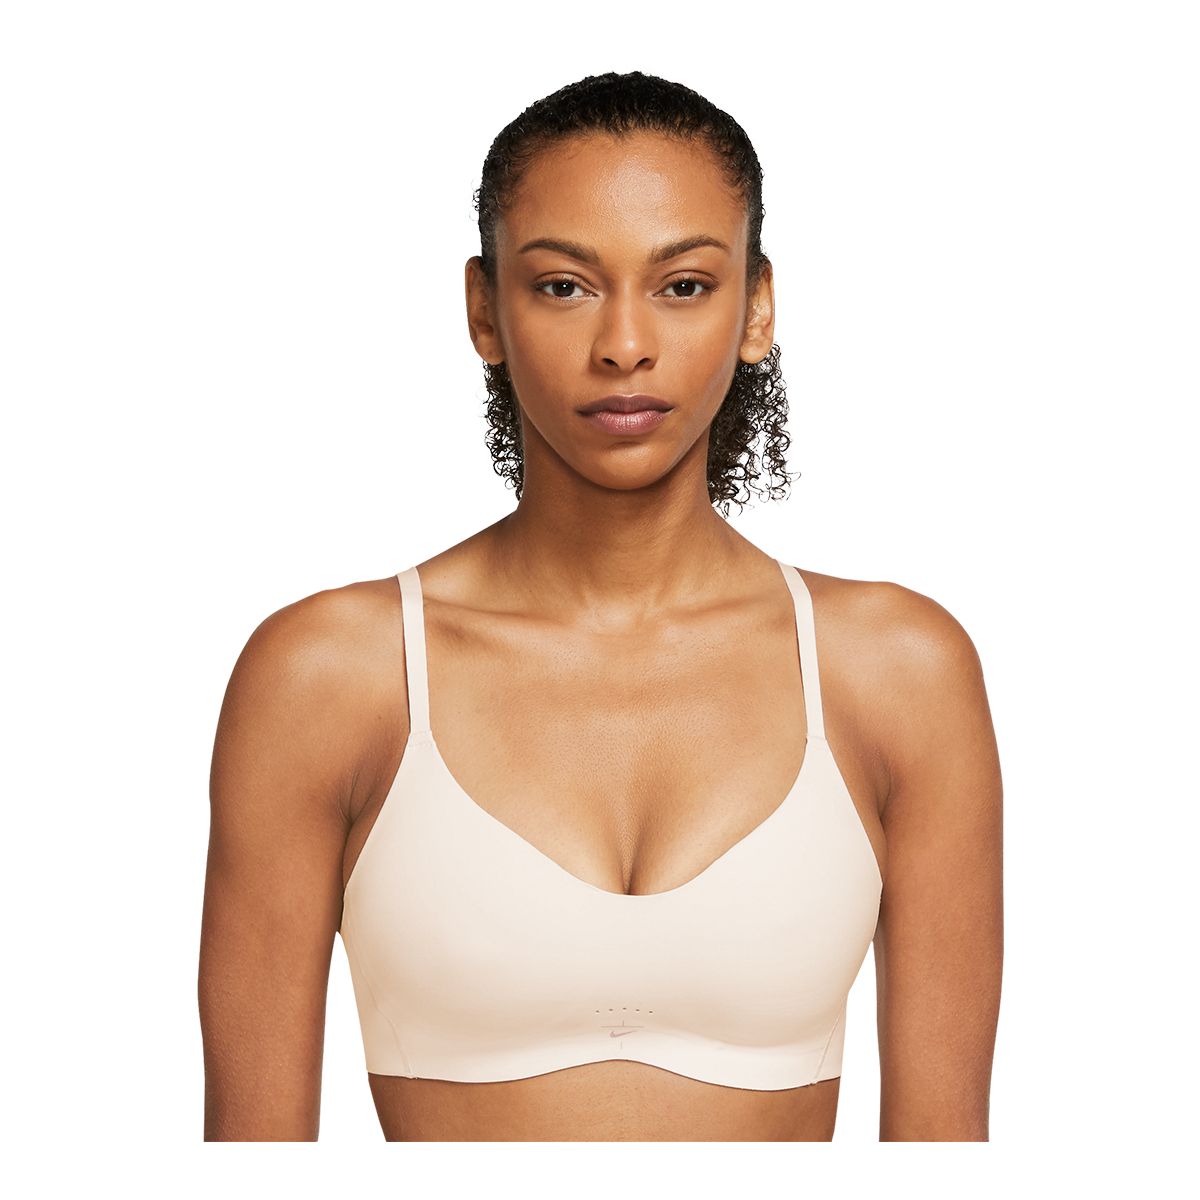 PINK Active Seamless Air Low Impact Sports Bra